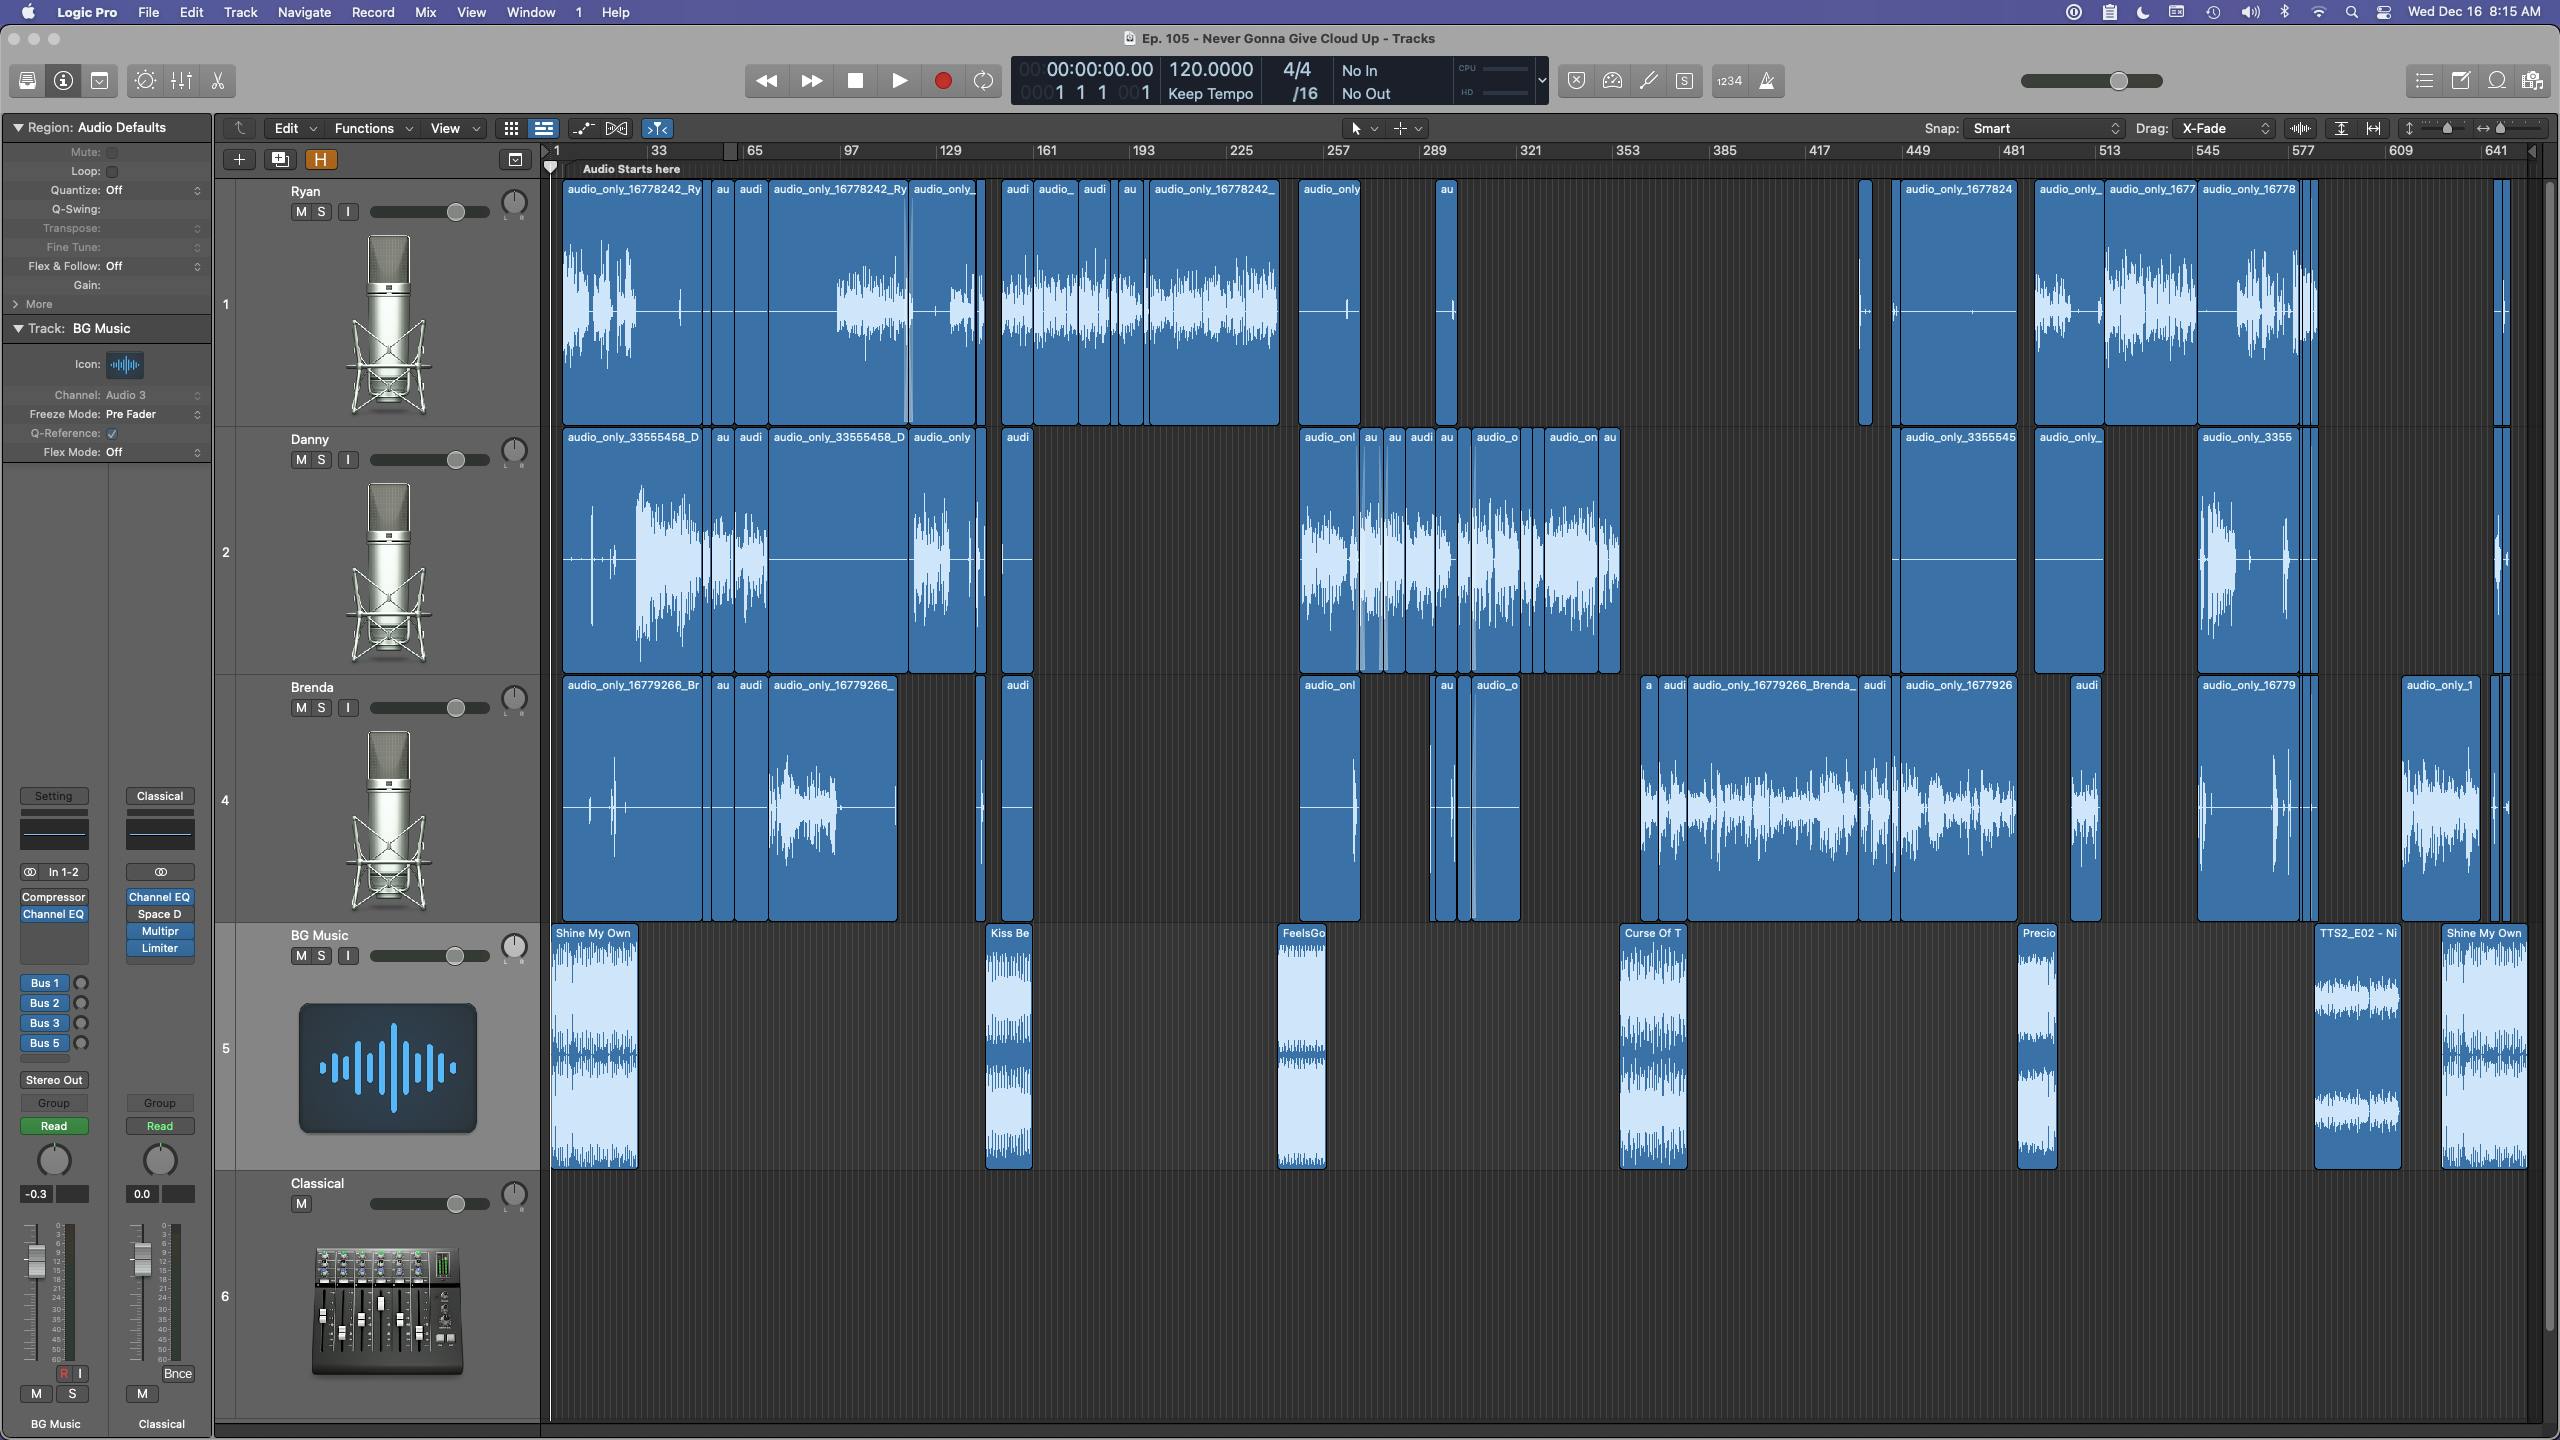 This is what Episode 105 looks like in Logic Pro X. 